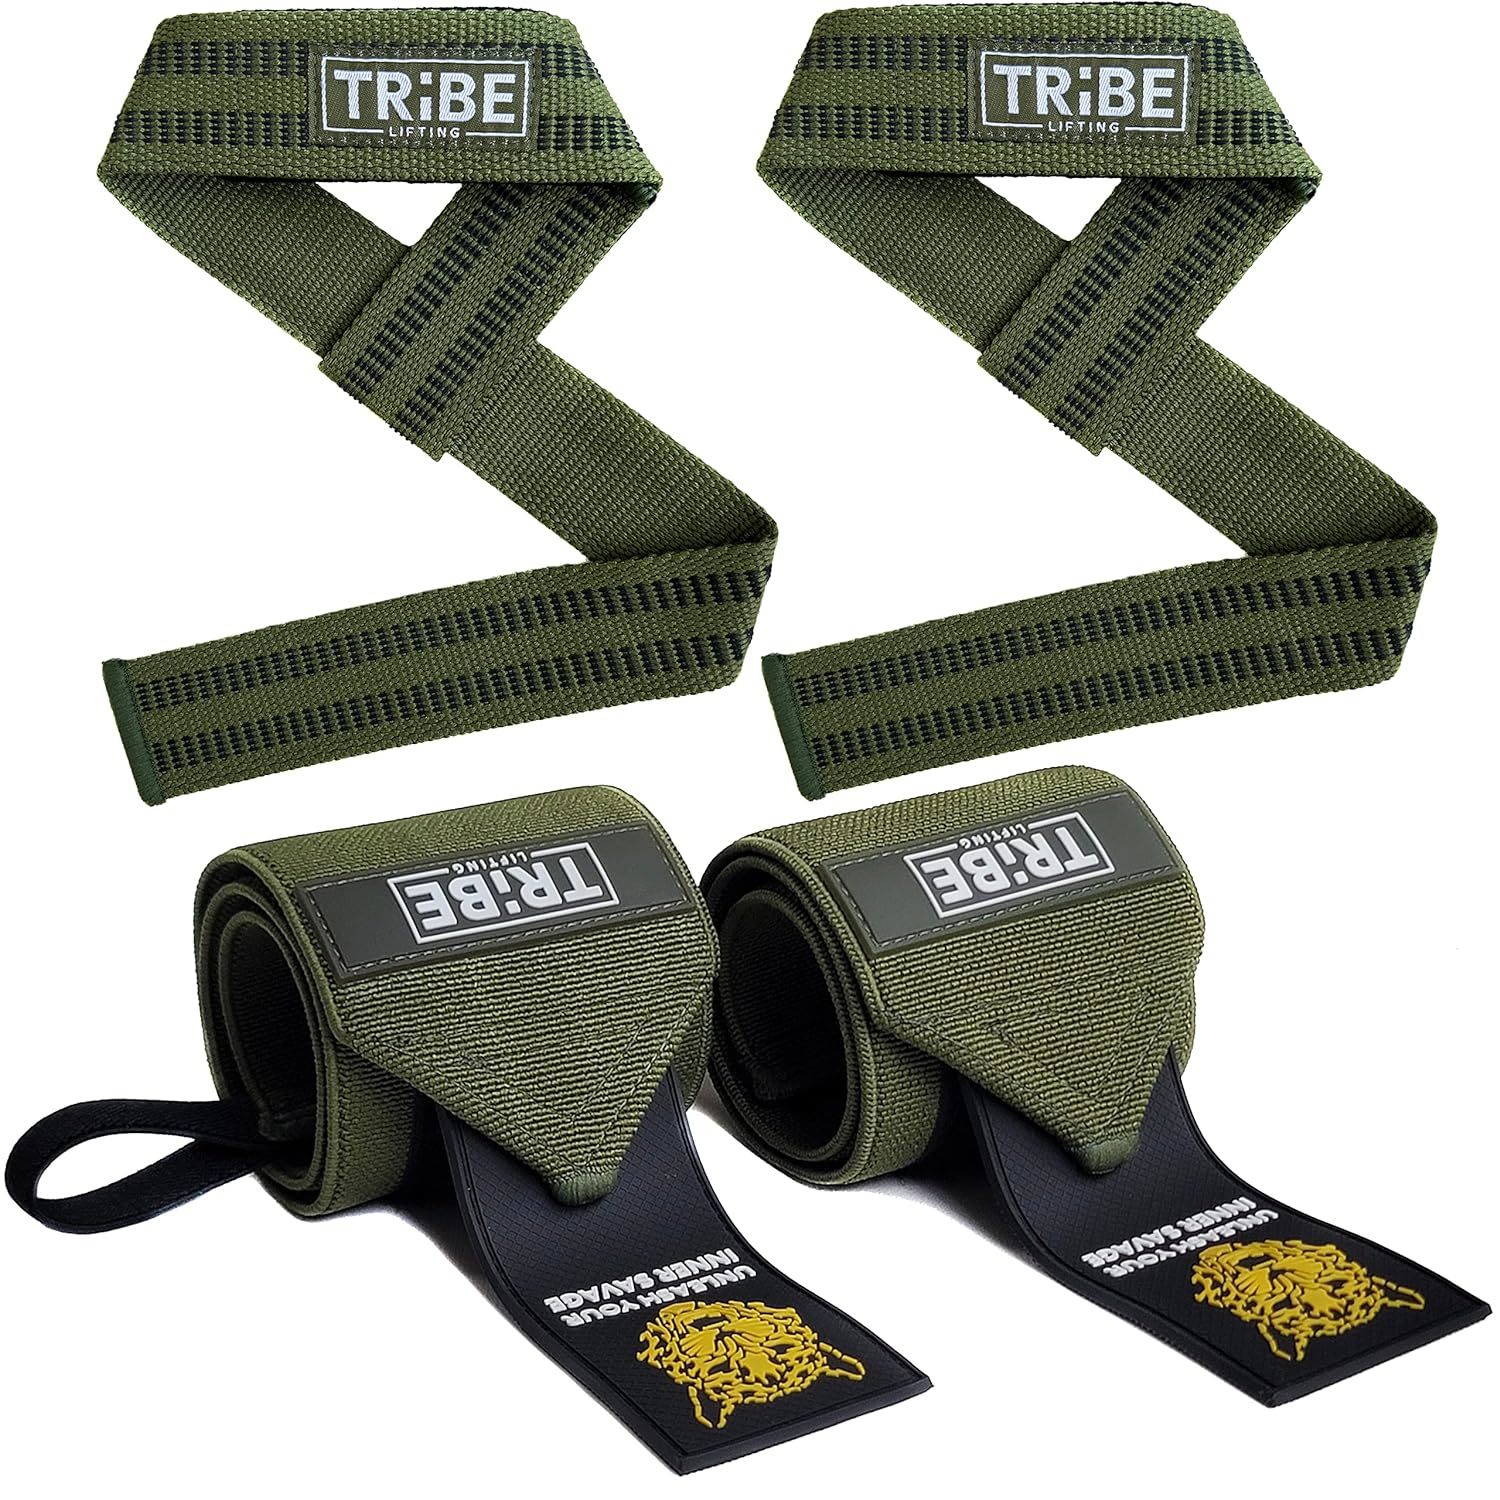 Primary image for Heavy Duty Wrist Wraps And Lifting Straps - 21" Wrist Wraps For Weightlifting Me